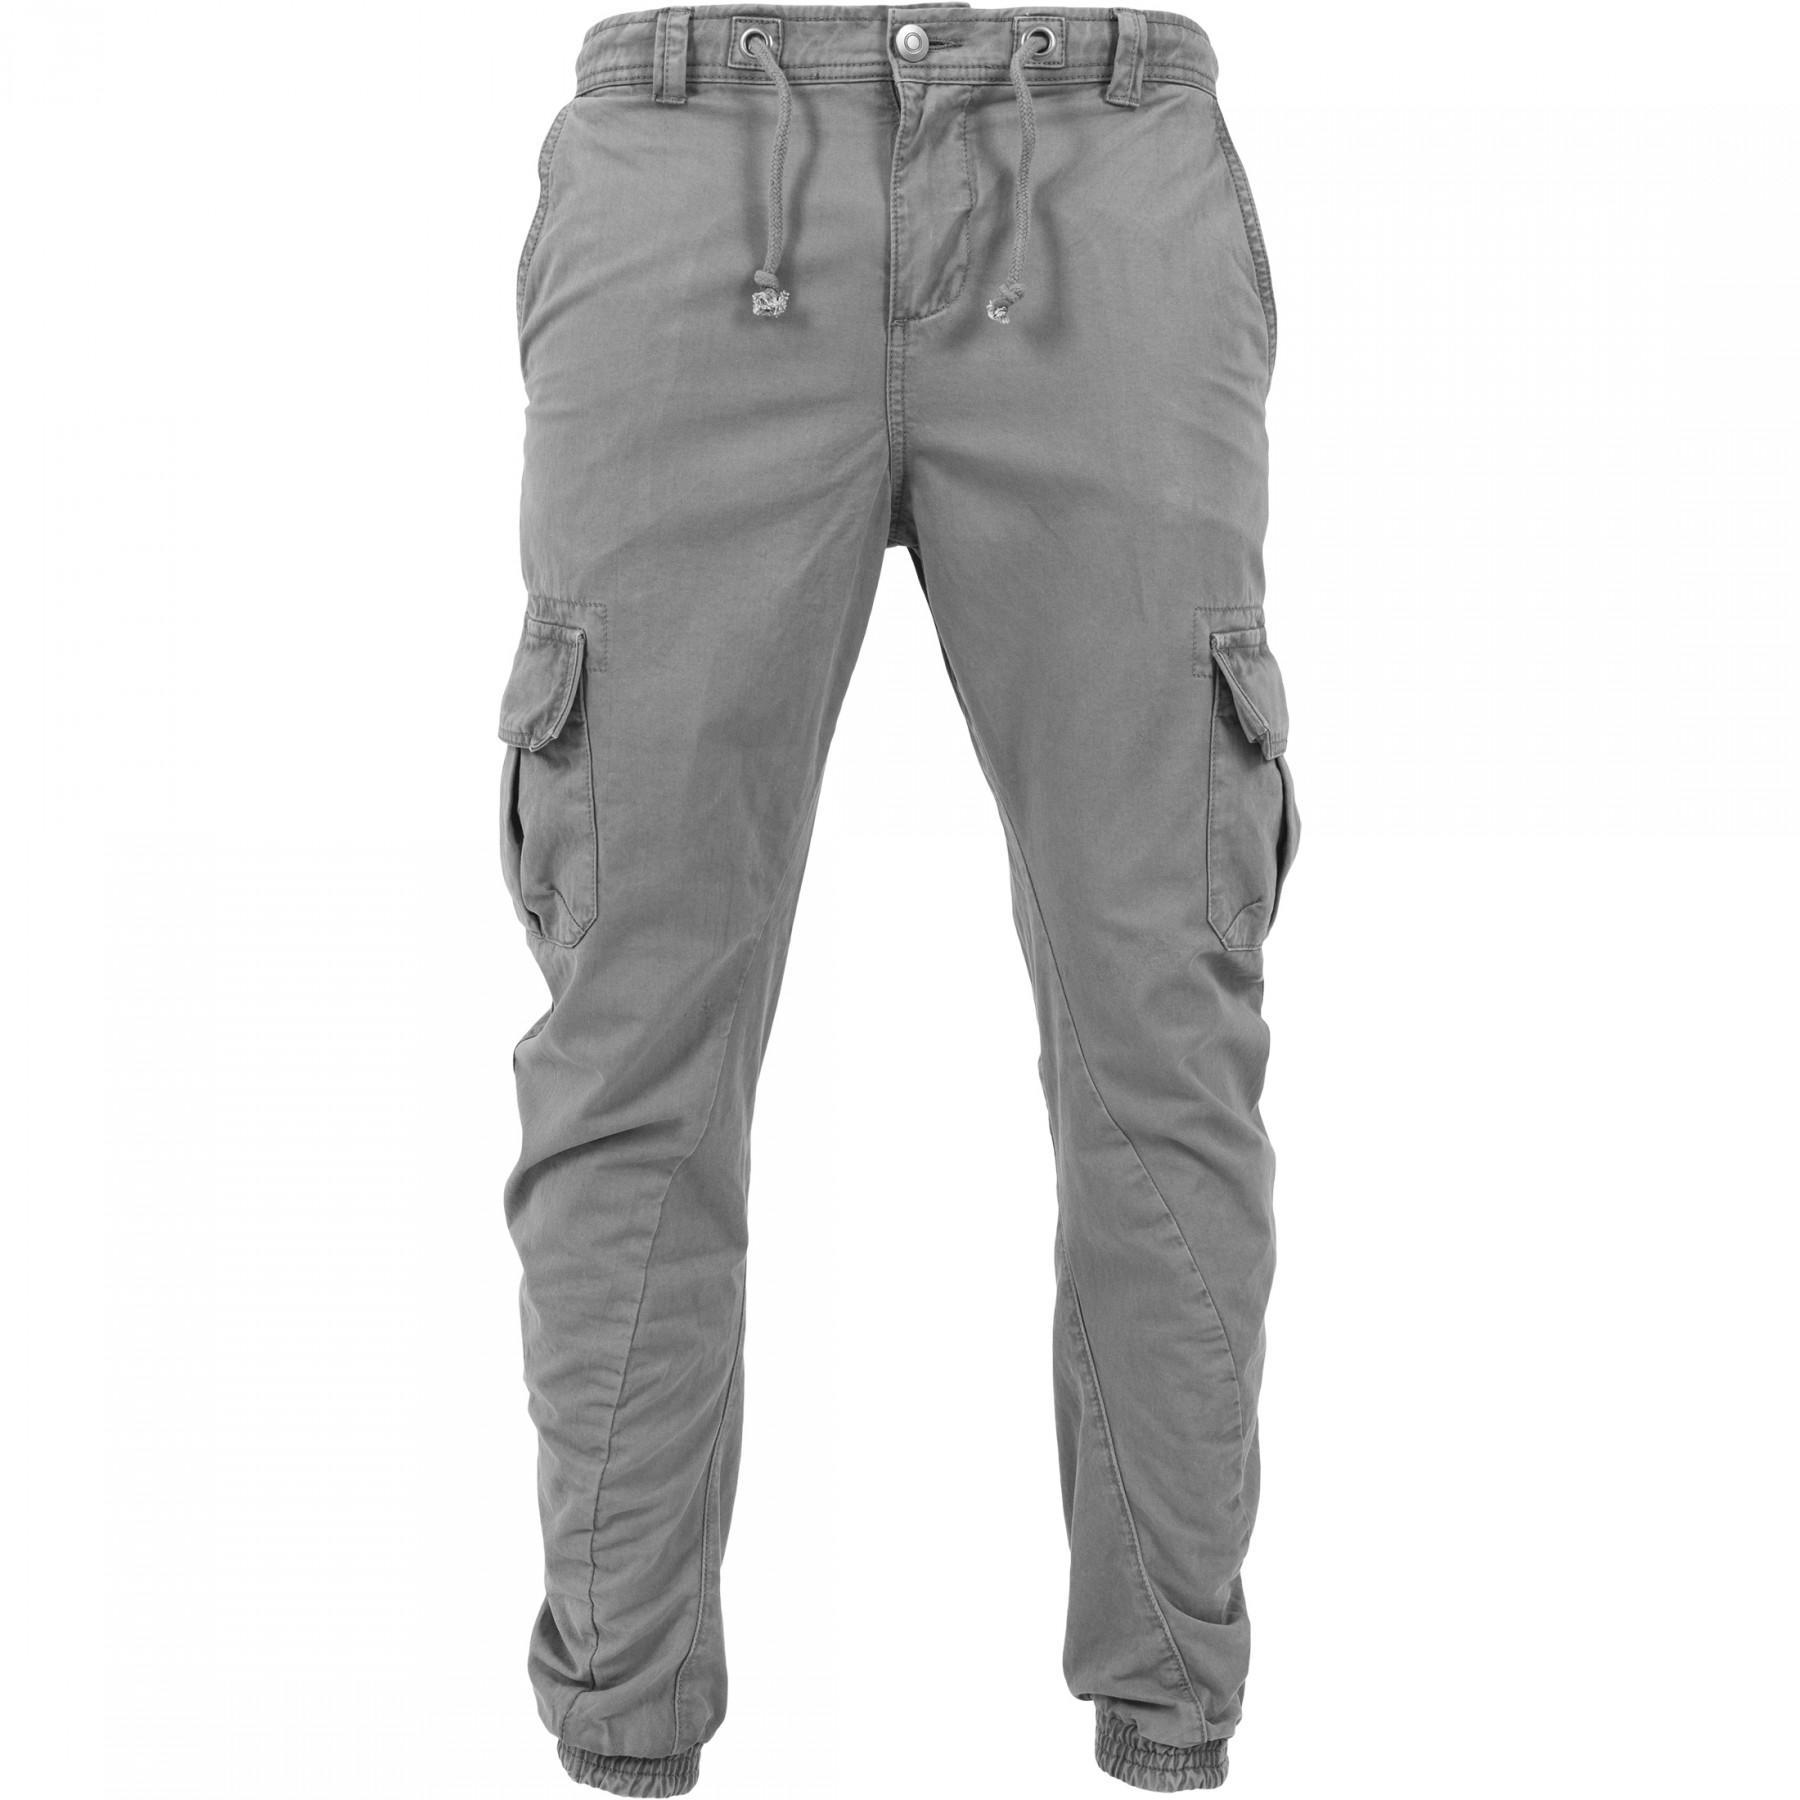 Guess Big Boys Twill Cargo Pants with Elastic Jogger Cuffs